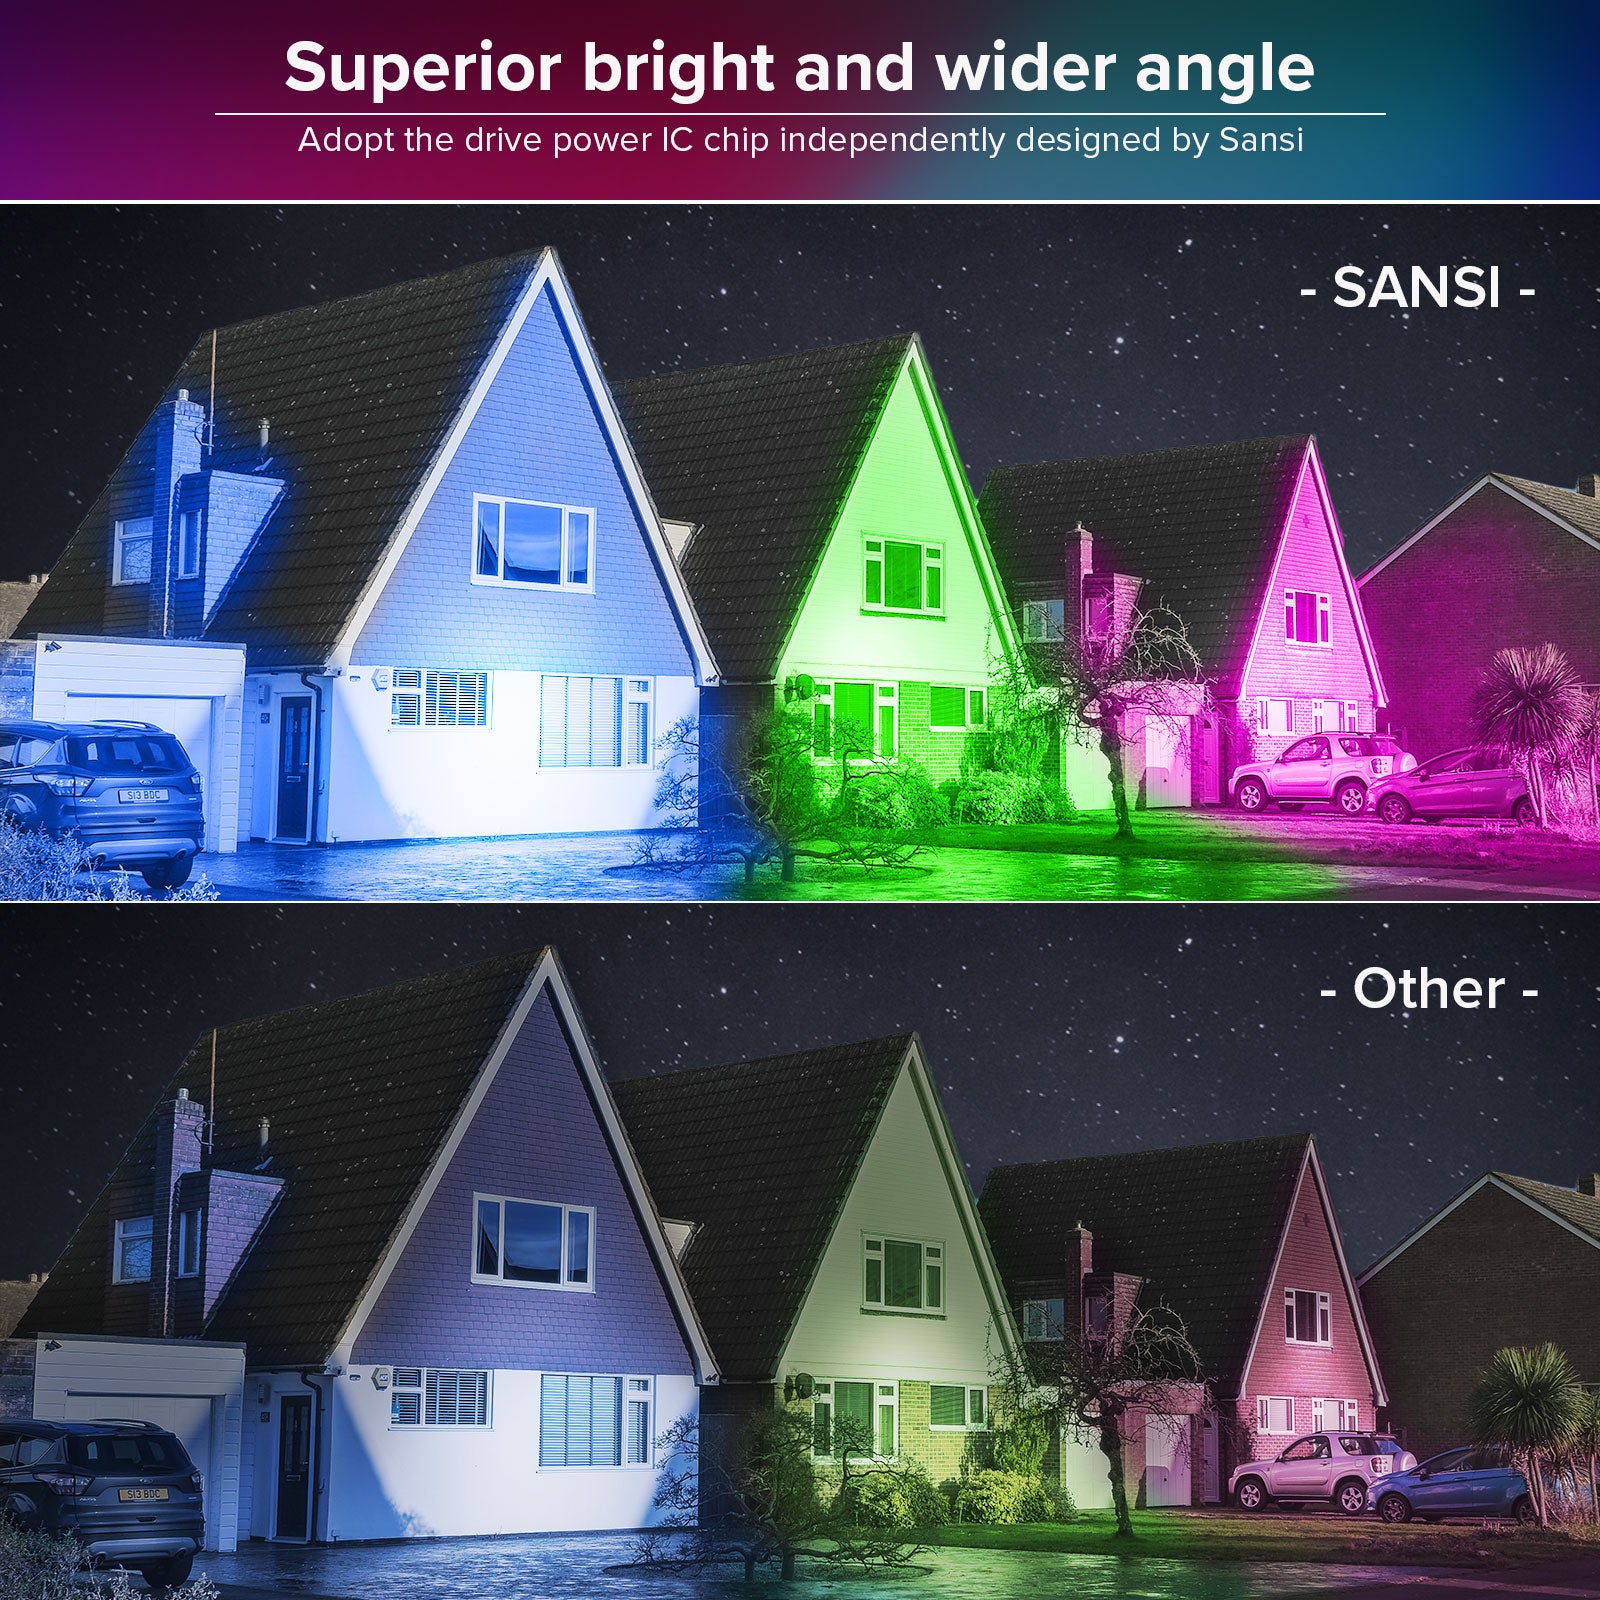 Upgraded 50W RGB LED Flood Light (US ONLY) has superior brightness and wider angle，which is adopted the drive power lC chip independently designed by SANSI.